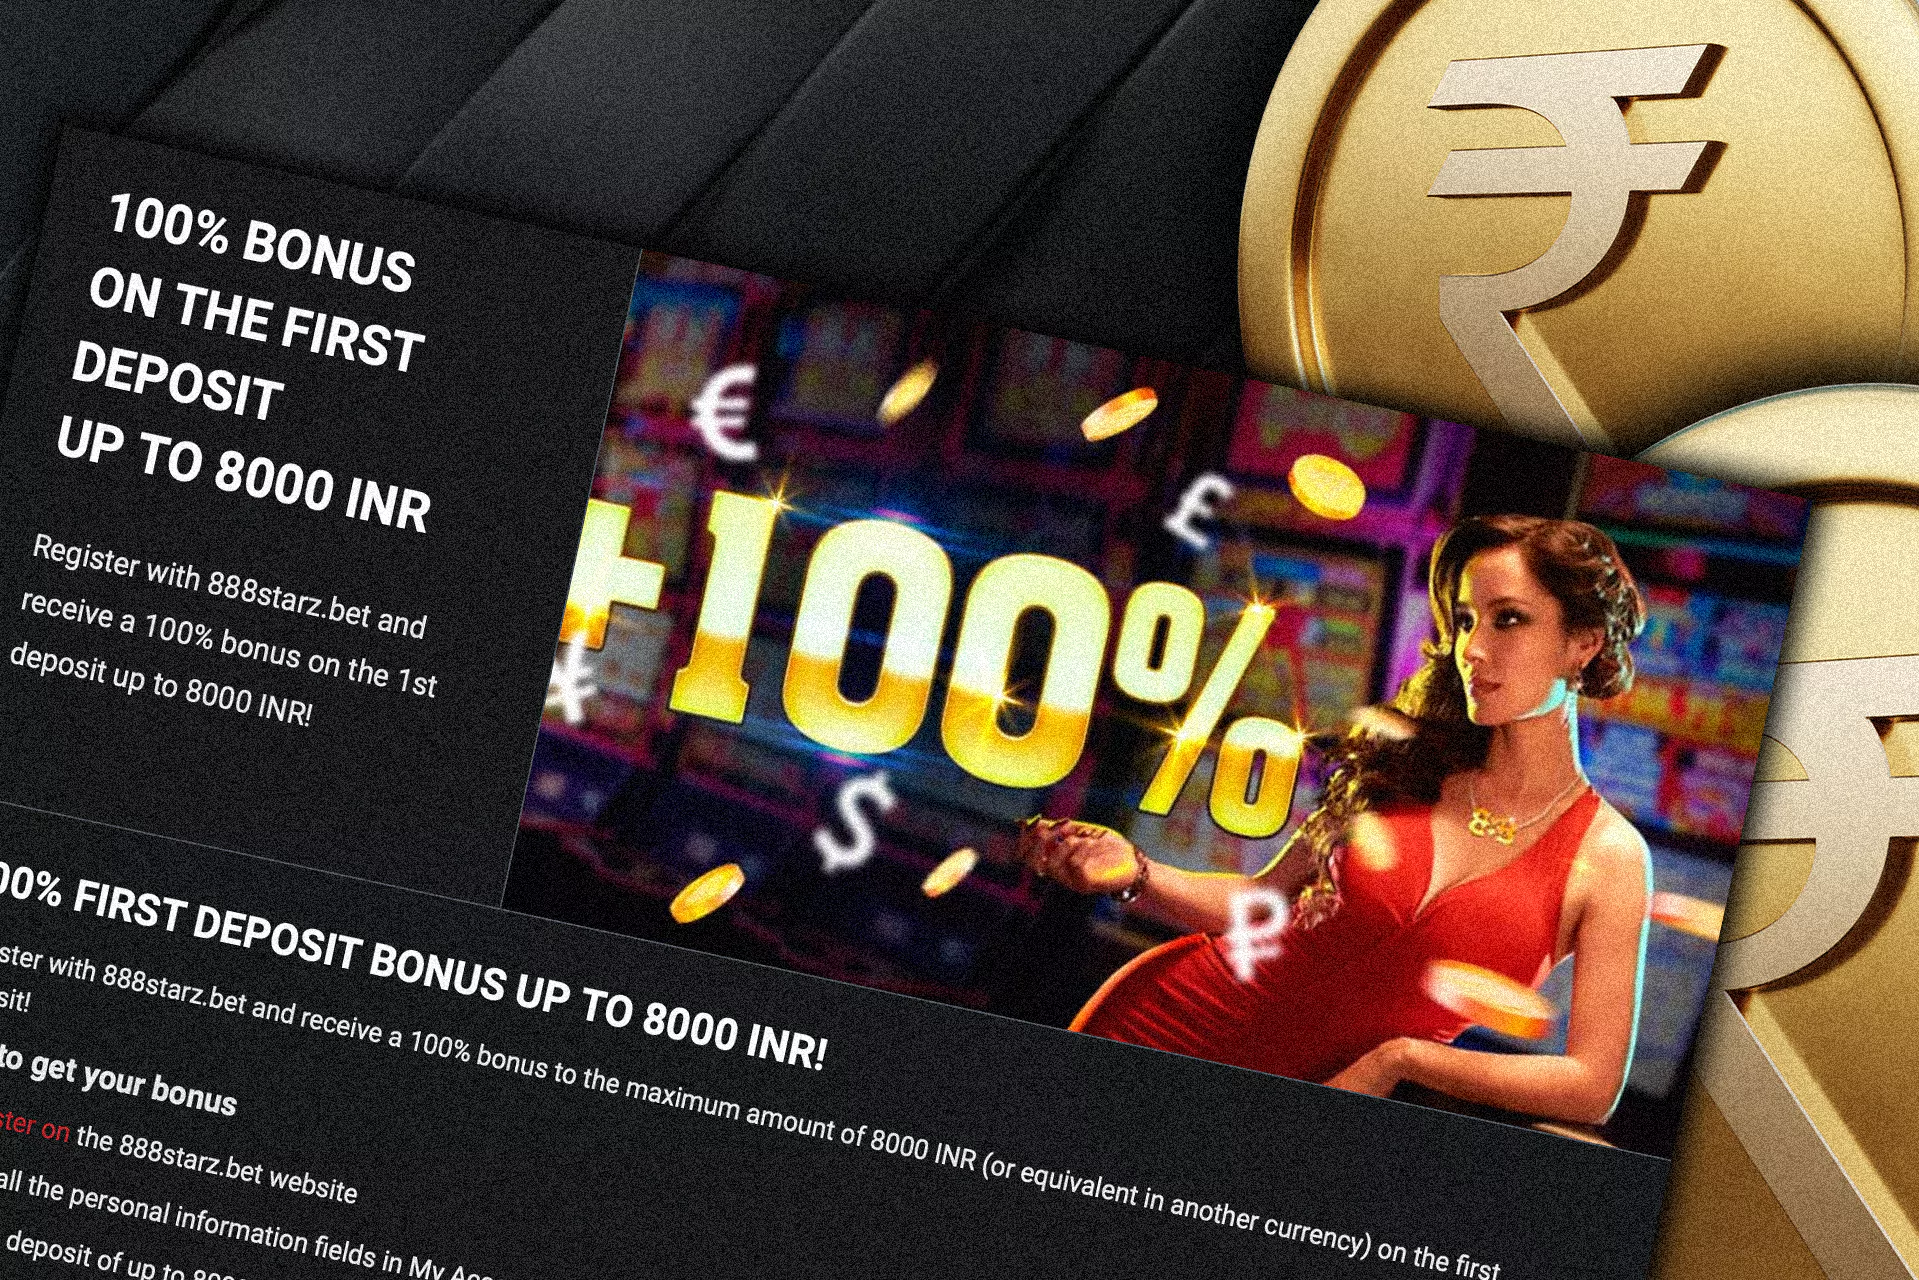 888Starz Welcome Bonus is available after making your first deposit.